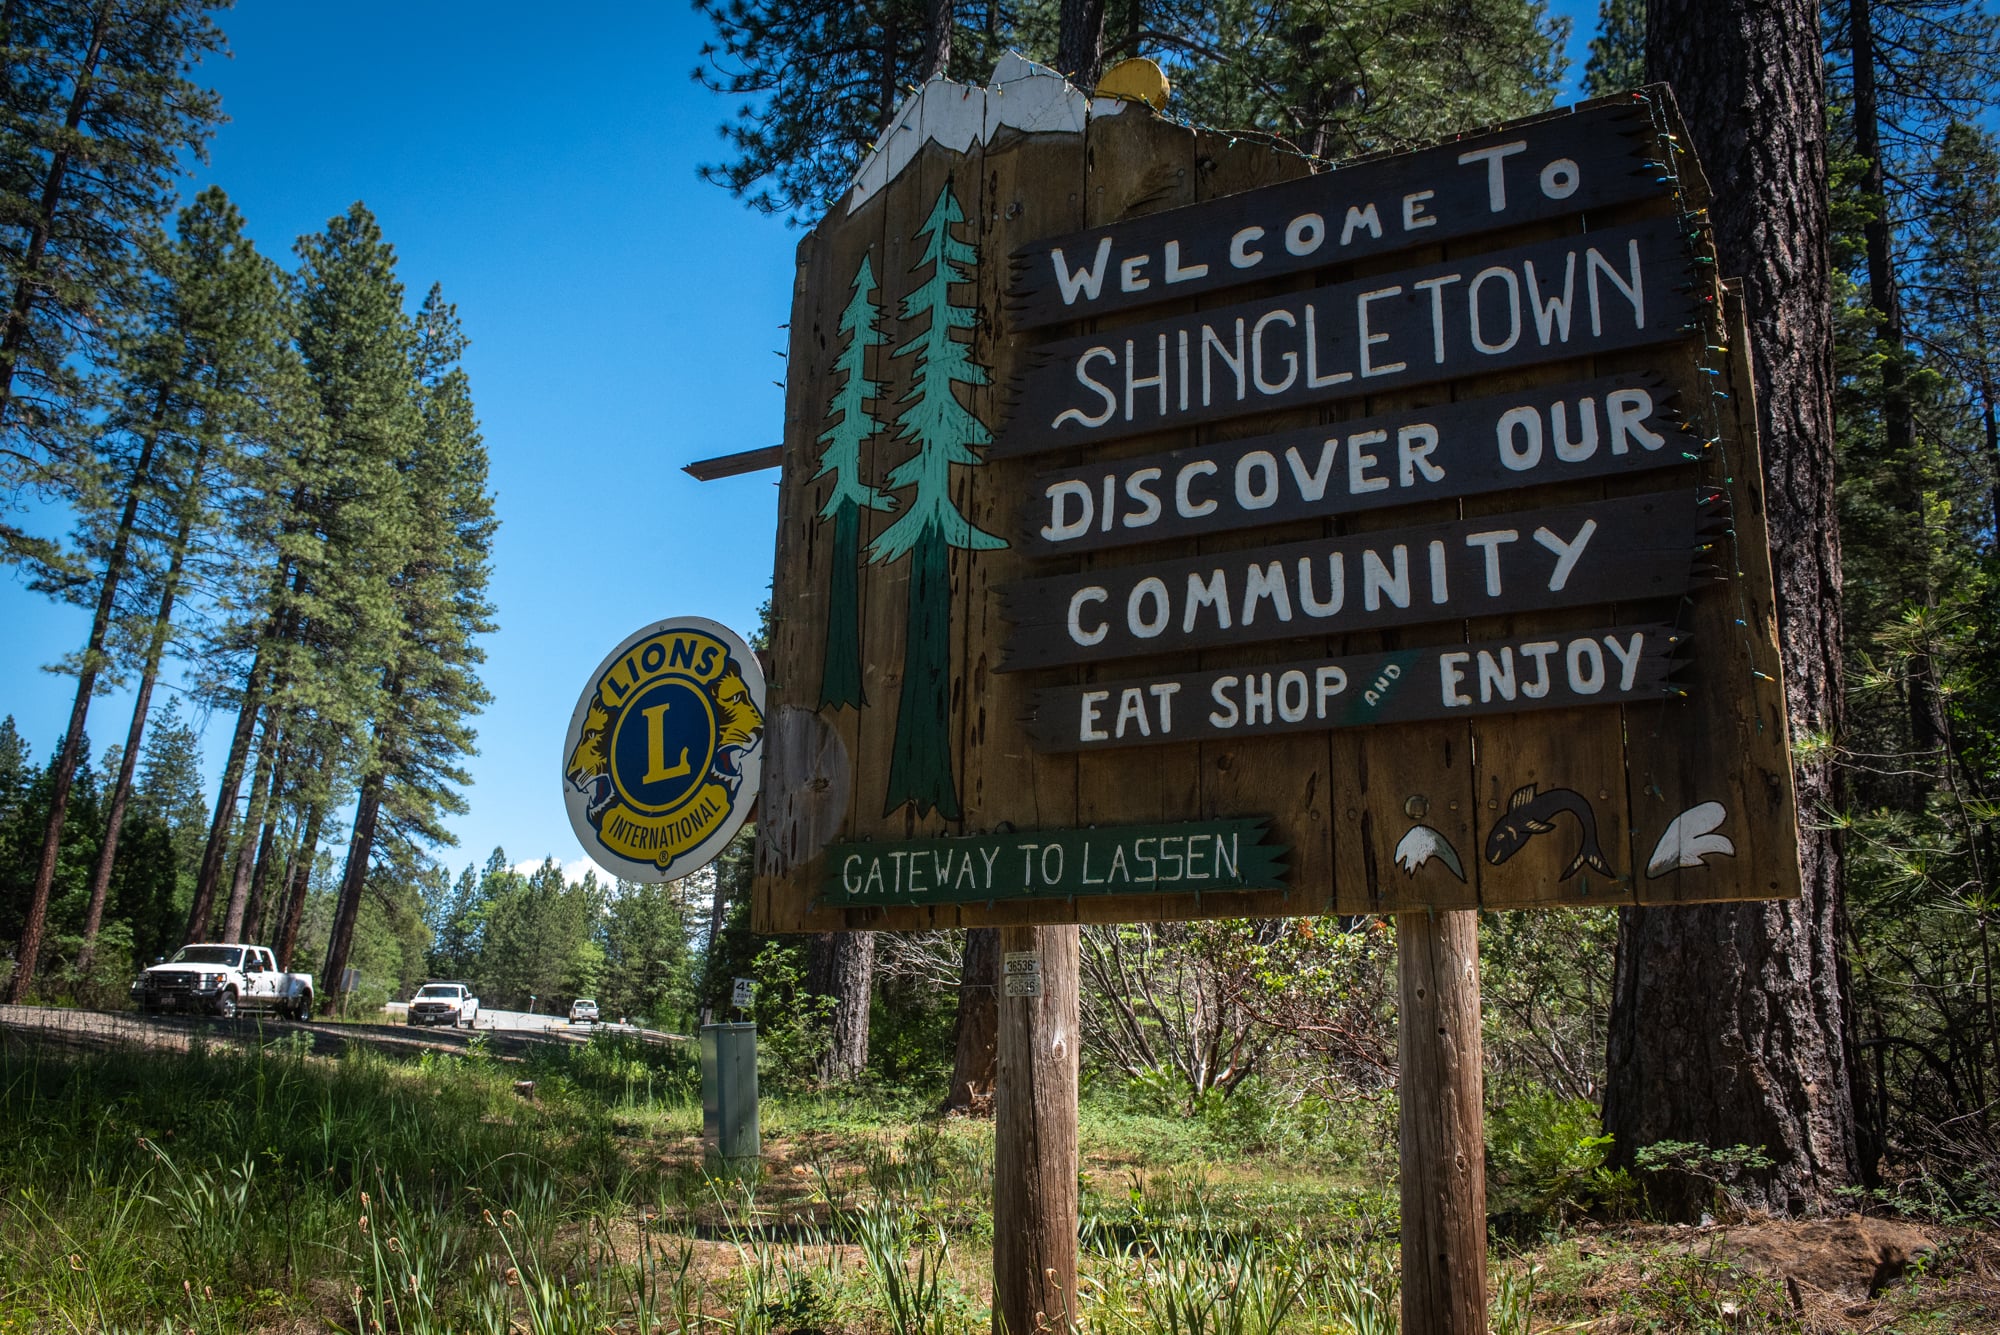 Shingletown, California, got its name from its heyday making wooden roofing materials. The wildfire-vulnerable town has two nicknames, Little Paradise and Gateway to Mount Lassen. (Anton L. Delgado/News21)